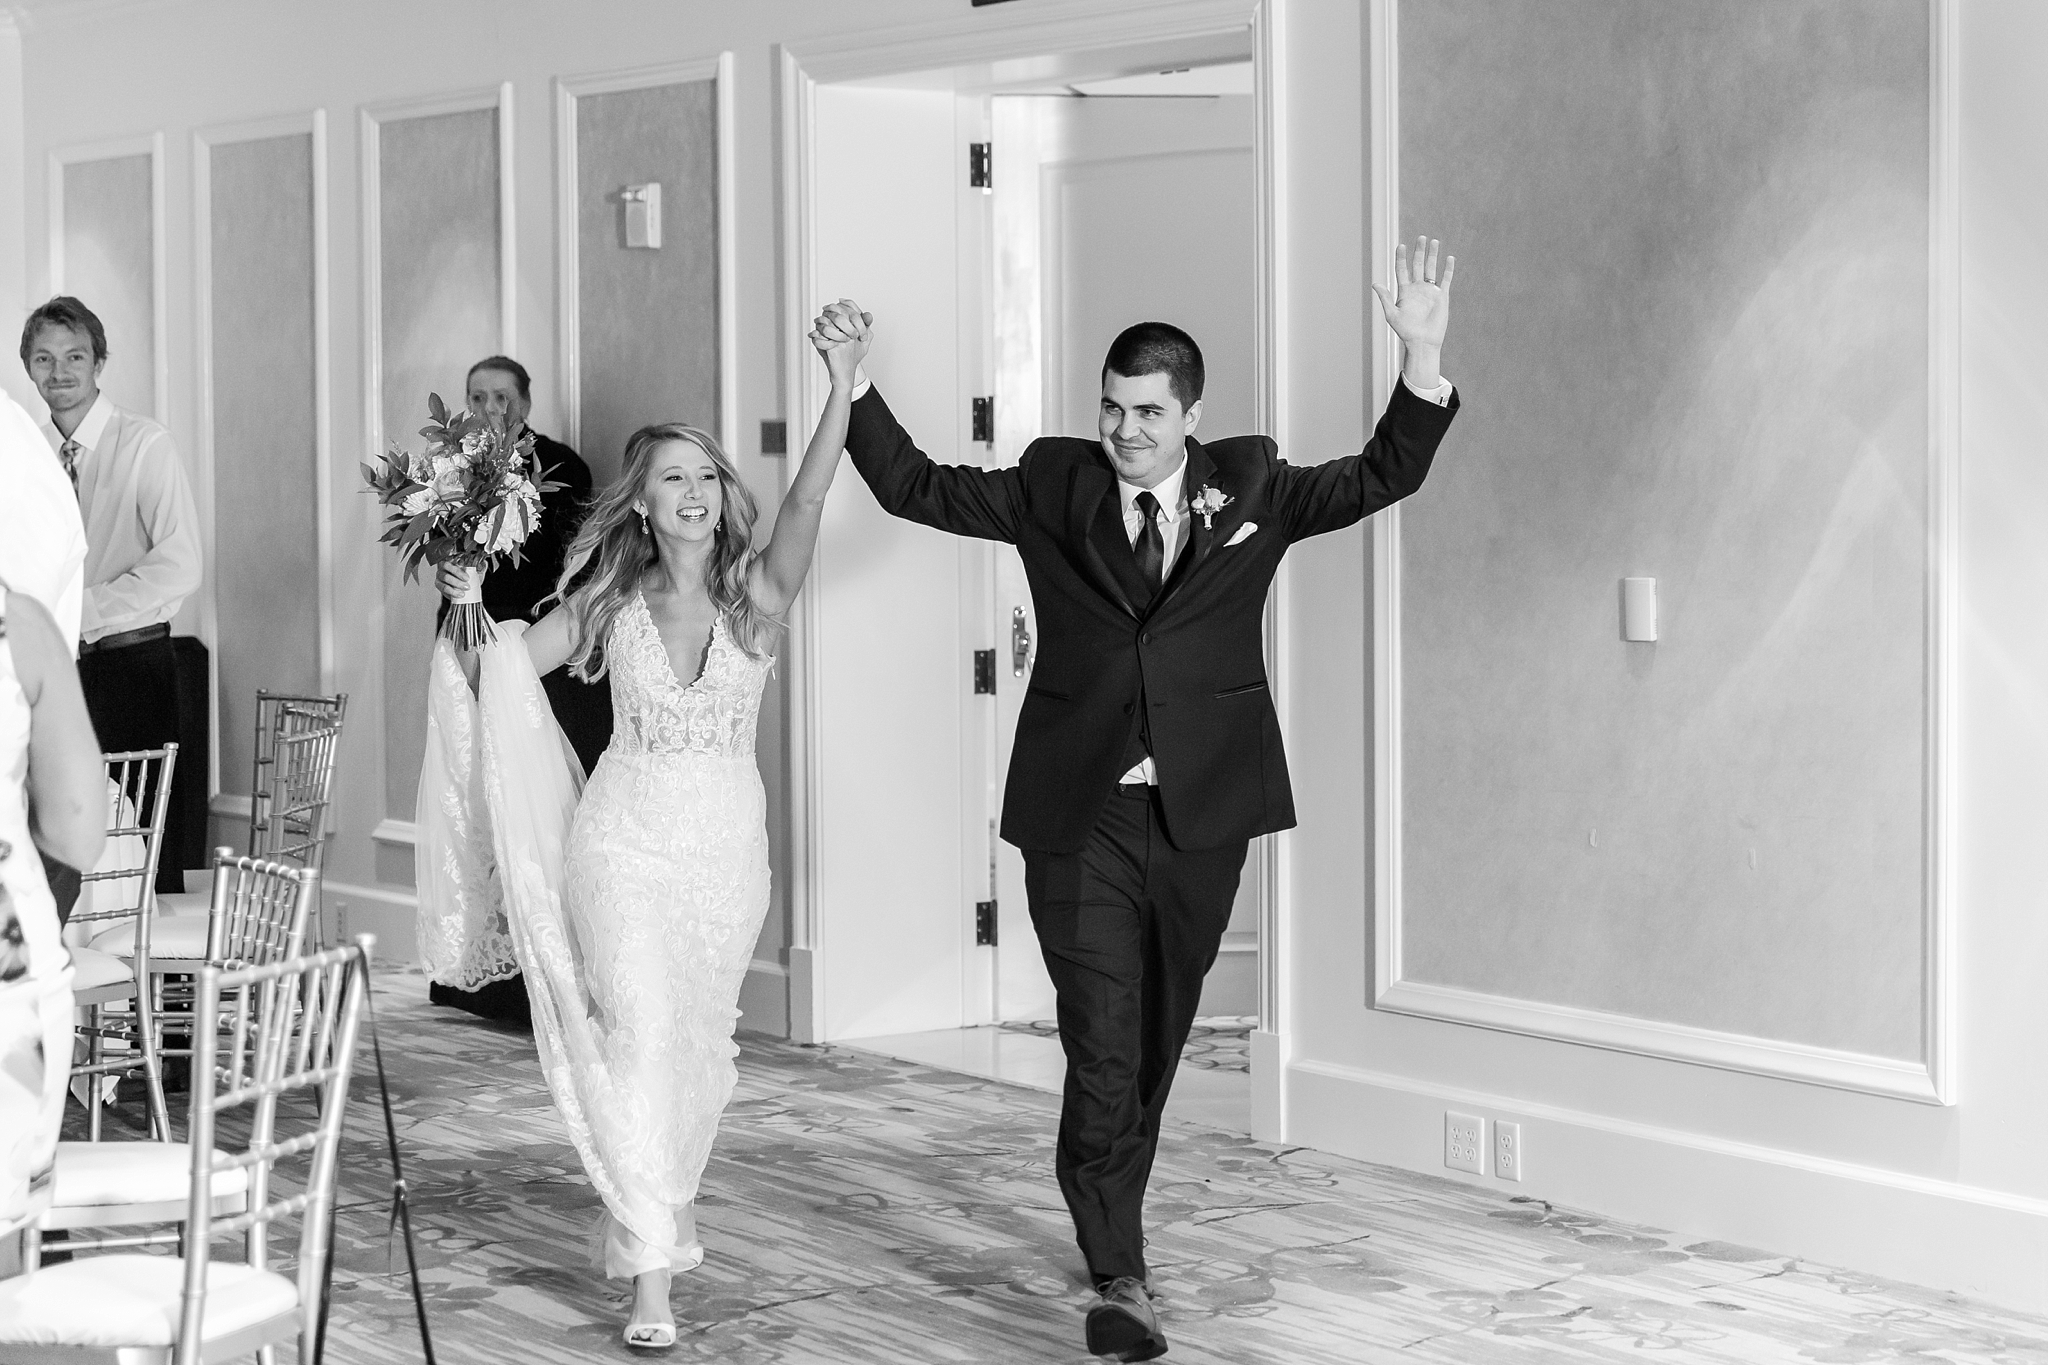 candid-romantic-wedding-photos-at-the-h-hotel-in-midland-michigan-by-courtney-carolyn-photography_0082.jpg